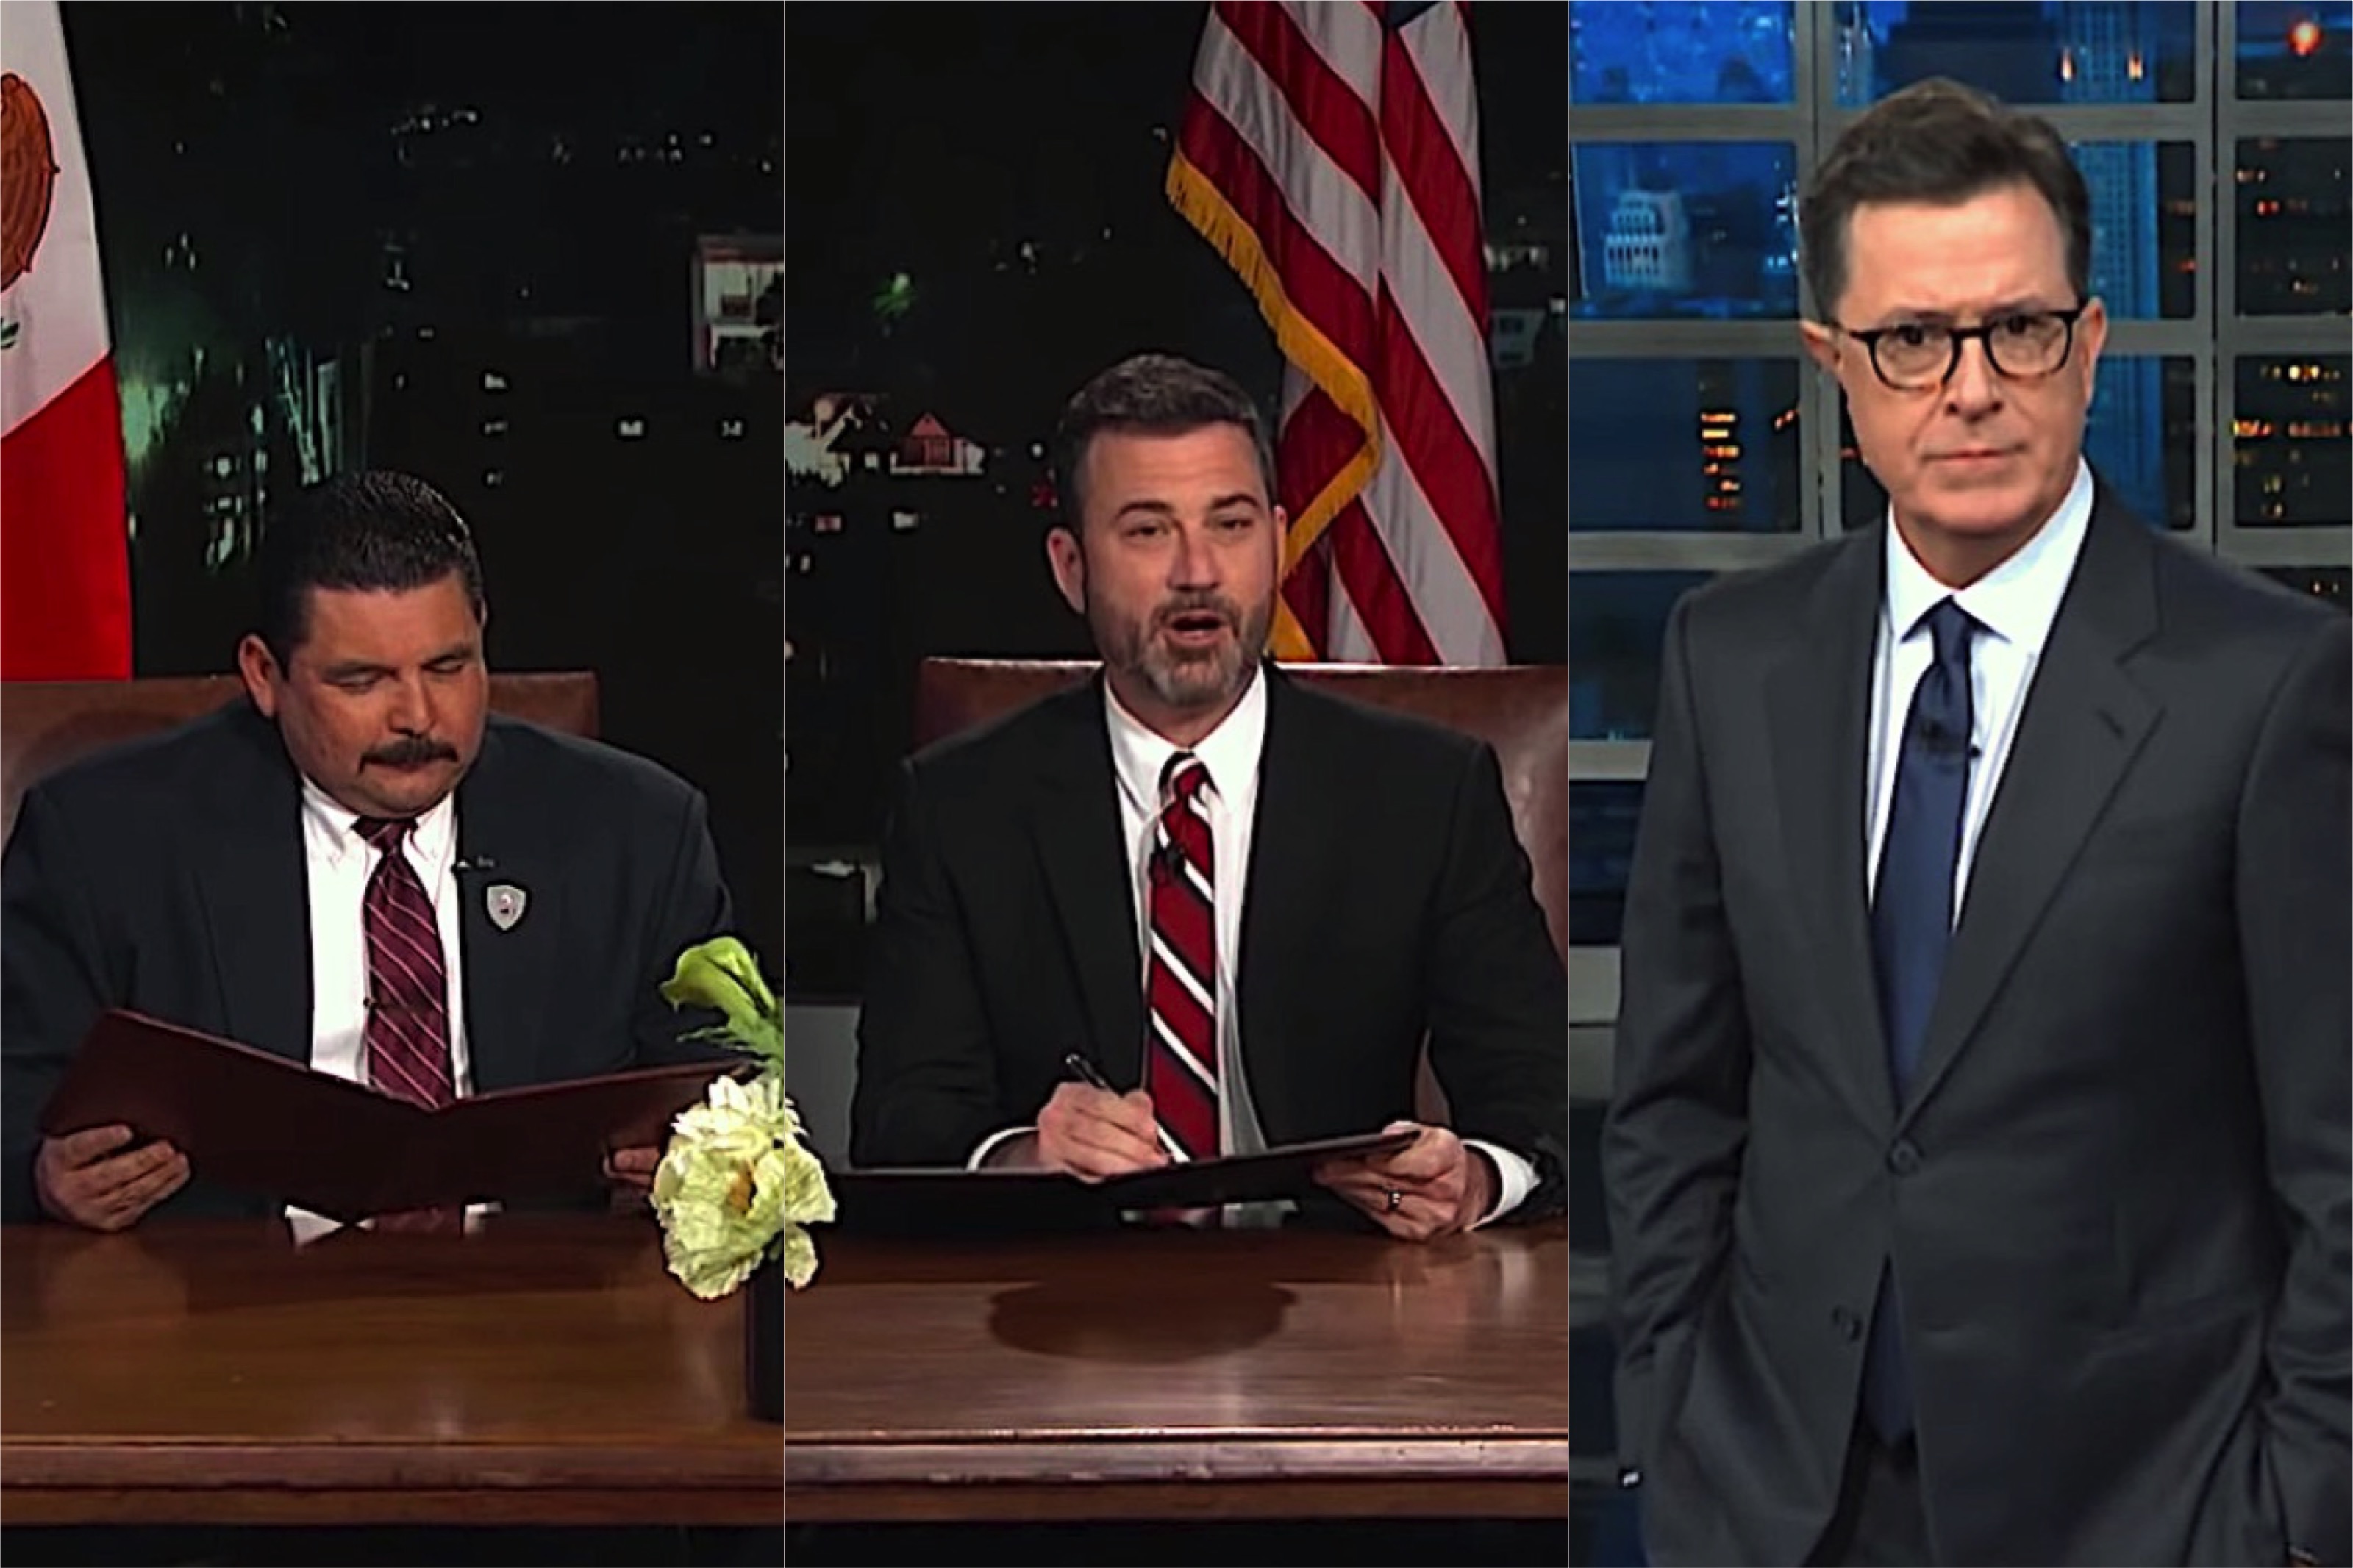 Jimmy Kimmel and Stephen Colbert are unimpressed with Trump dealmaking